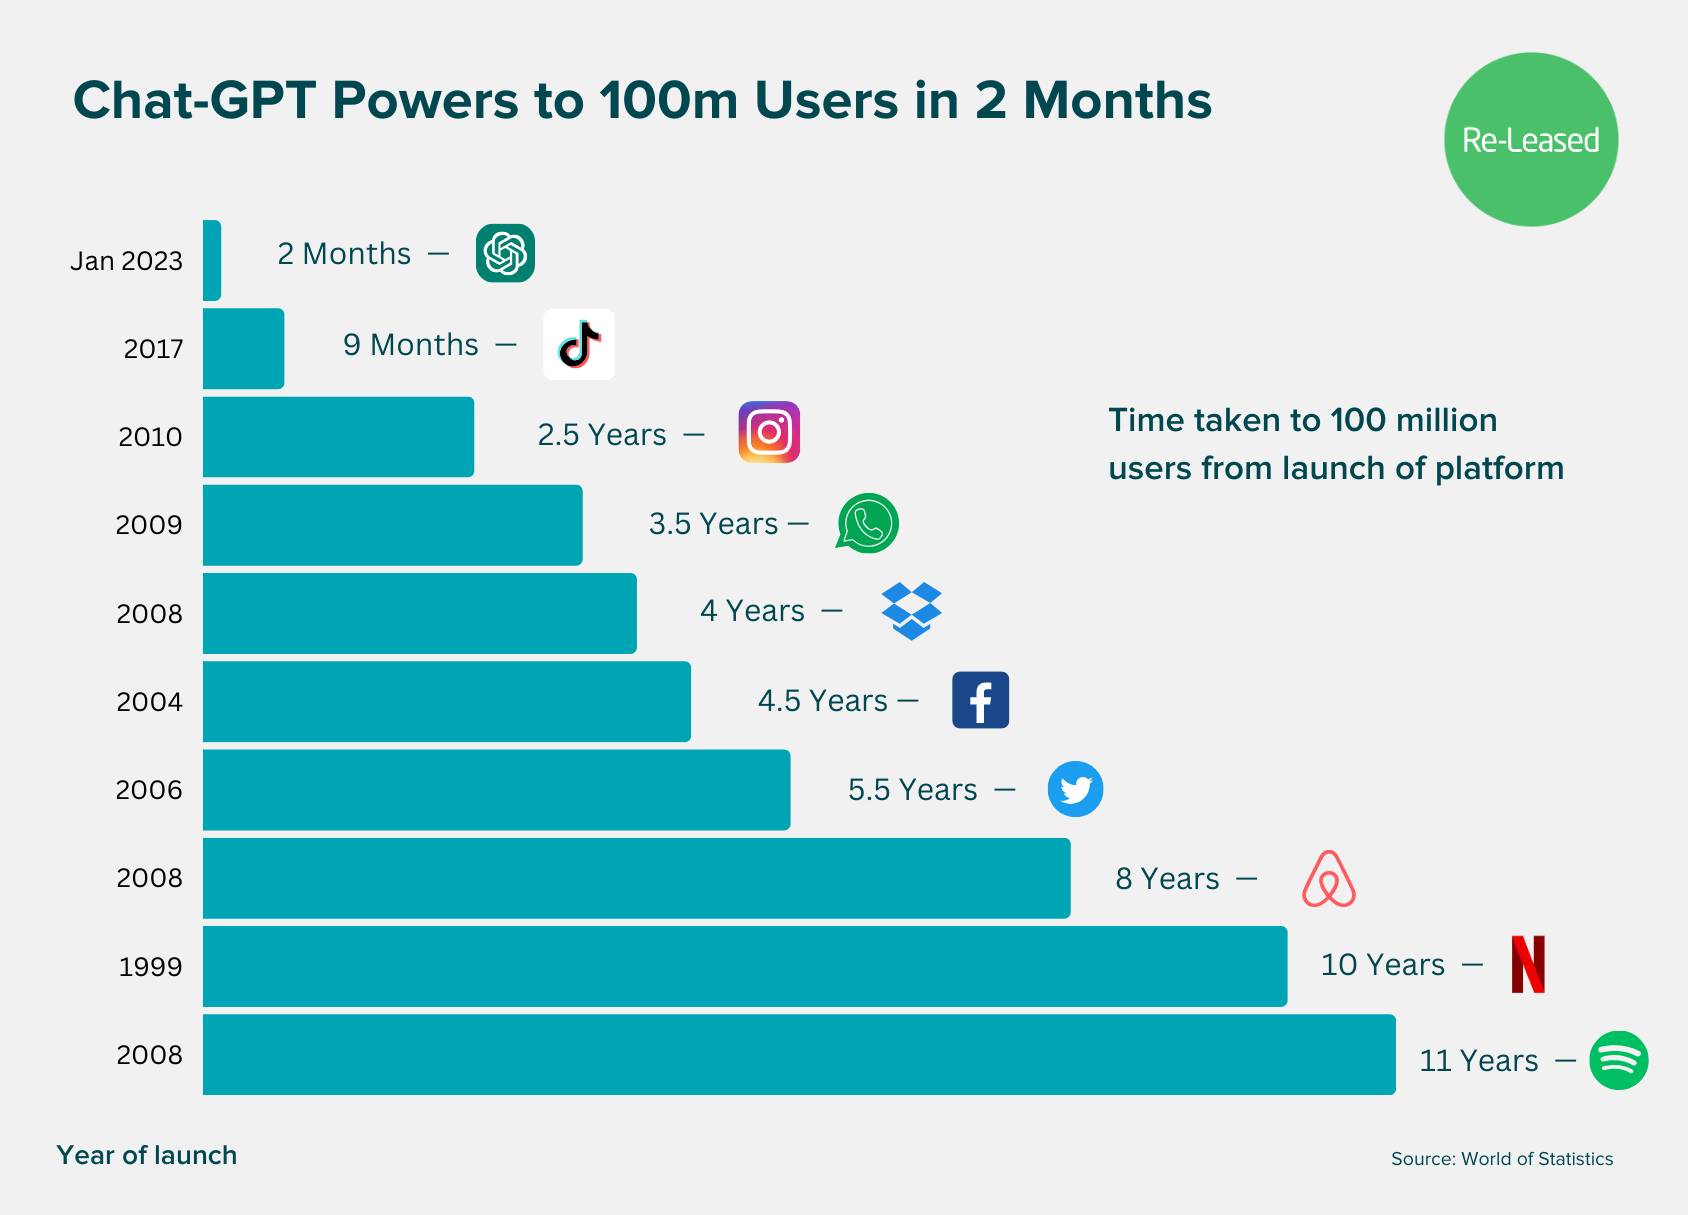 Chat-GPT Powers to 100m users in 2 months